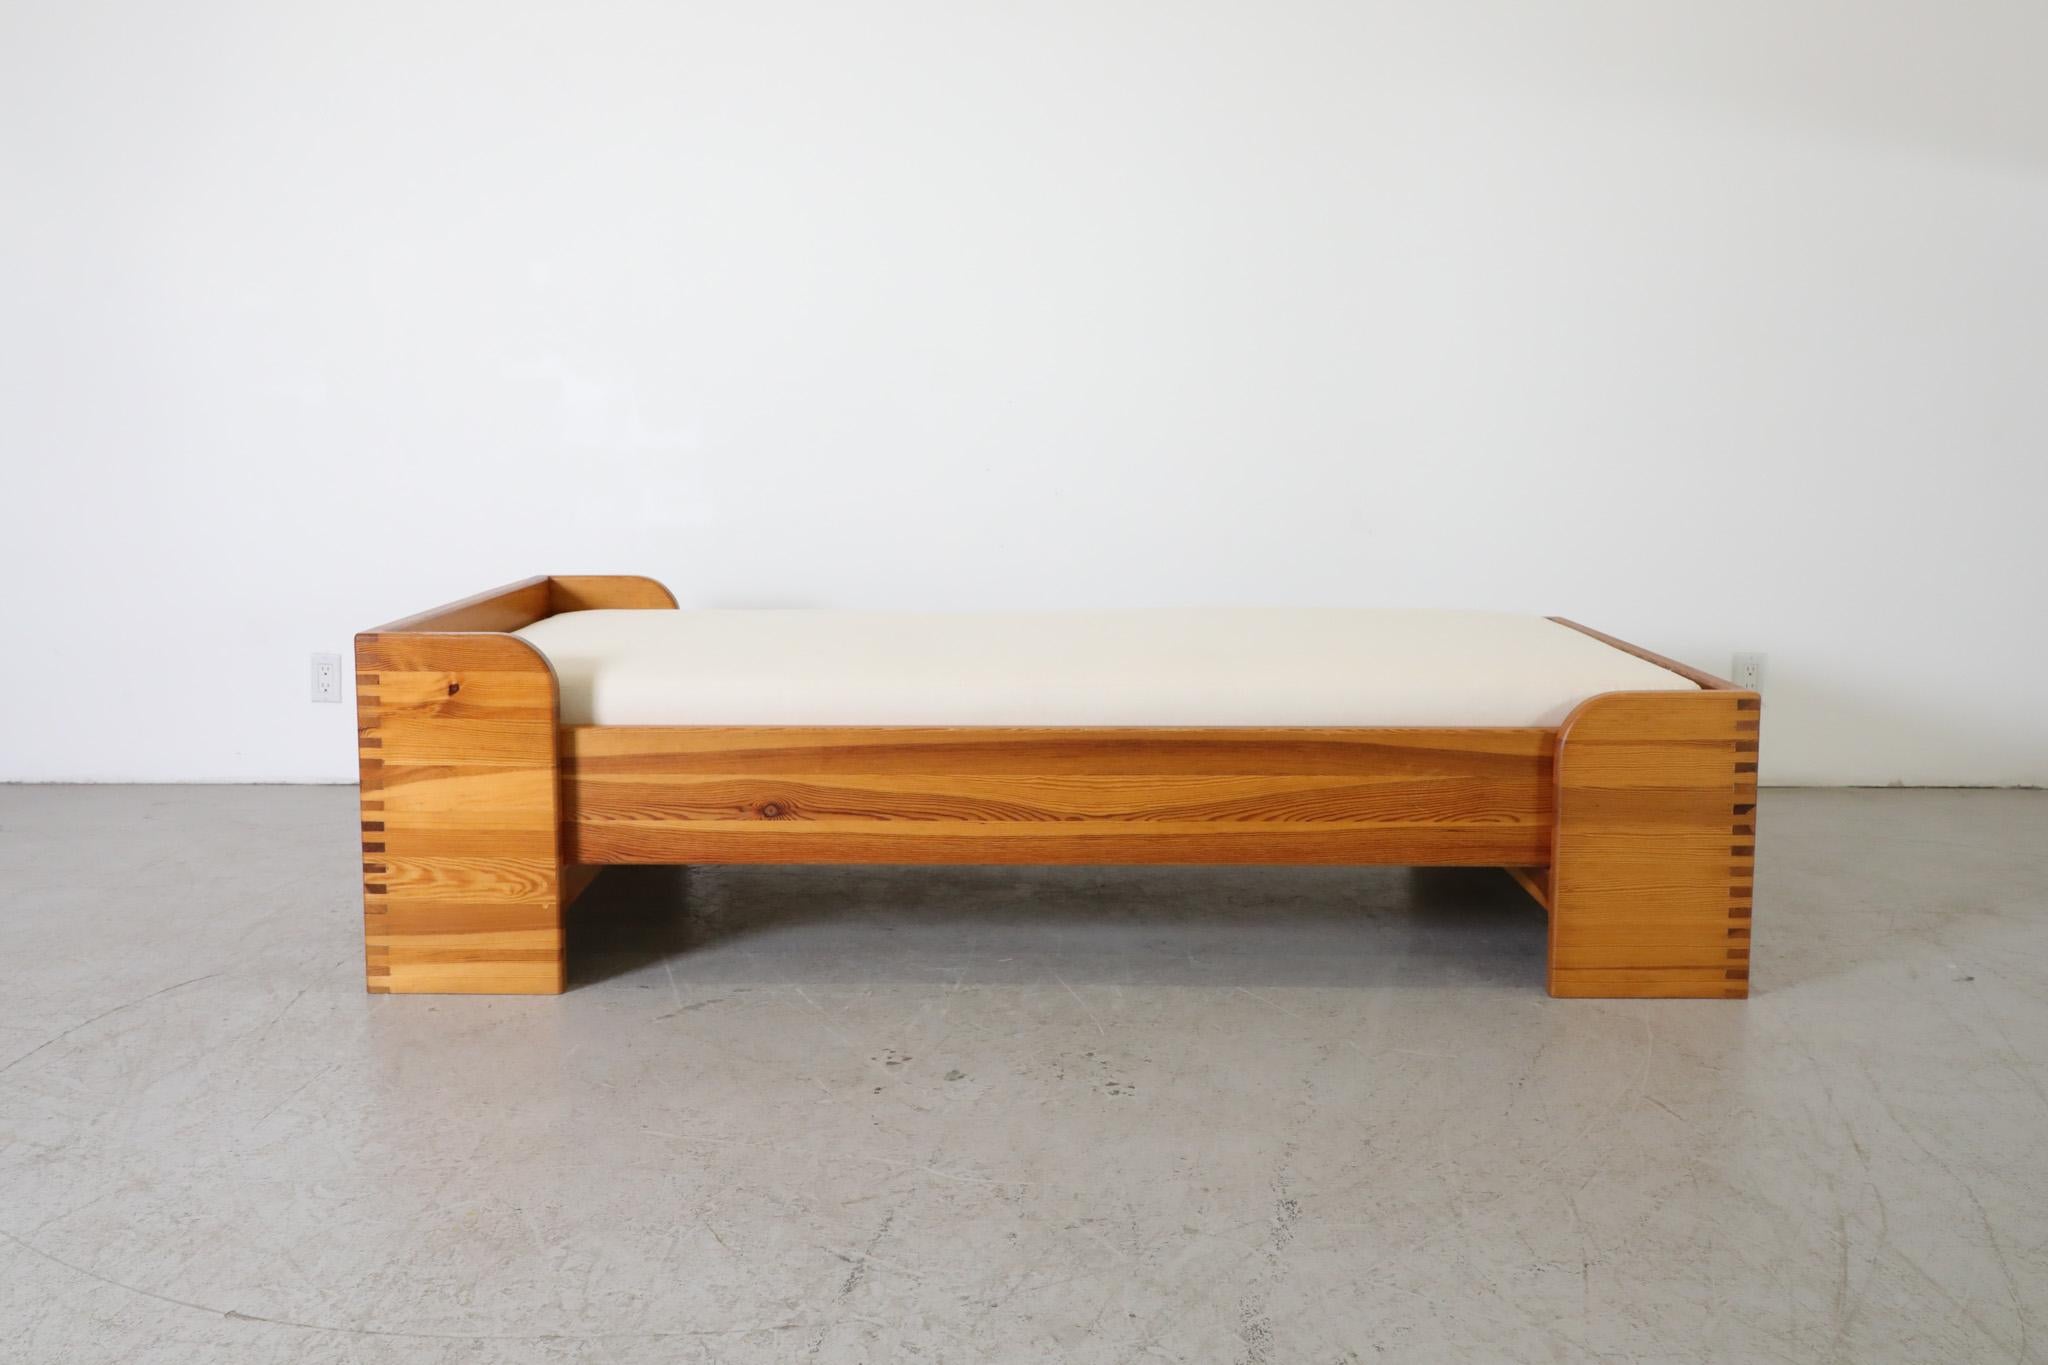 Mid-Century single bed frame by Ate Van Apeldoorn for Houtwerk Hattem, 1960's. Made from solid pine with box joints and arches on the base this European size frame fits a single 3' x 6'6”mattress (slats and mattress not included). The beautiful pine